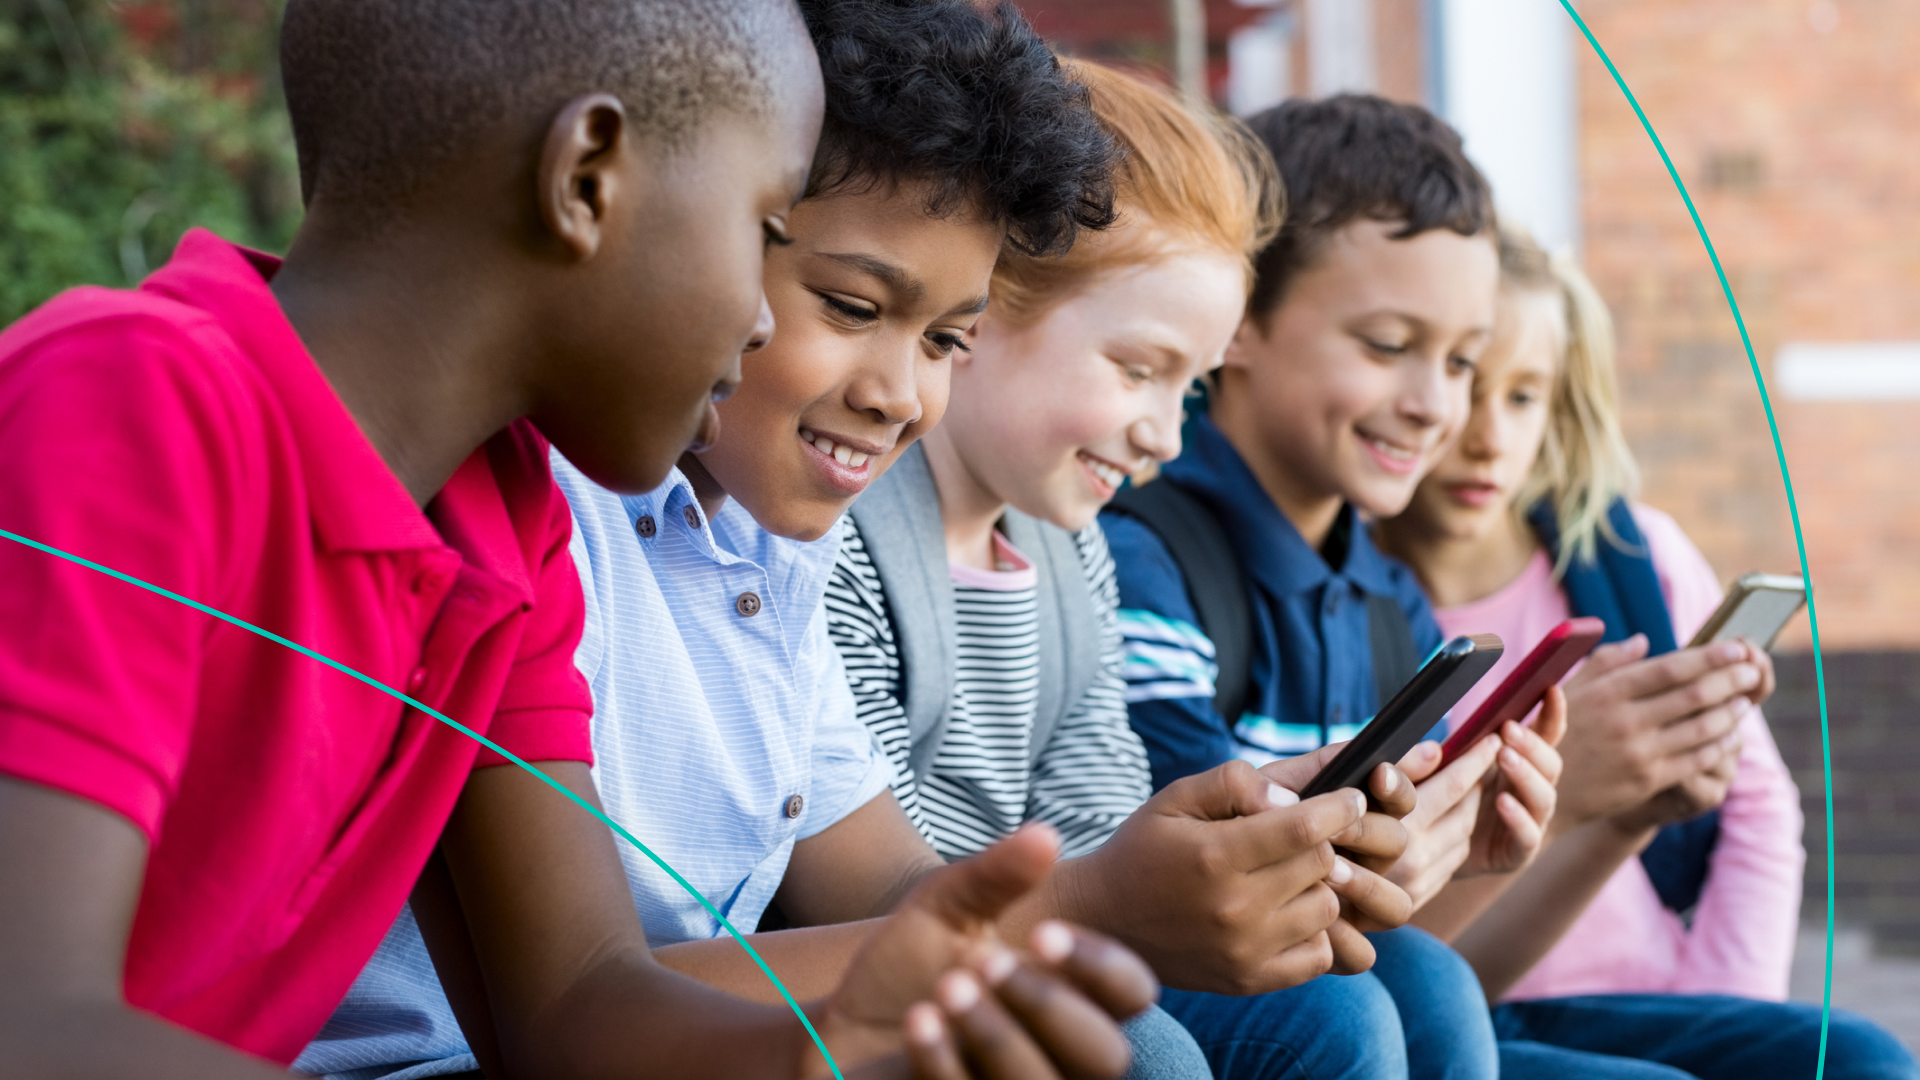 What’s the best age to get your kid a phone? An expert explains why it’s about more than age. Plus, 10 questions you should ask before making a decision.